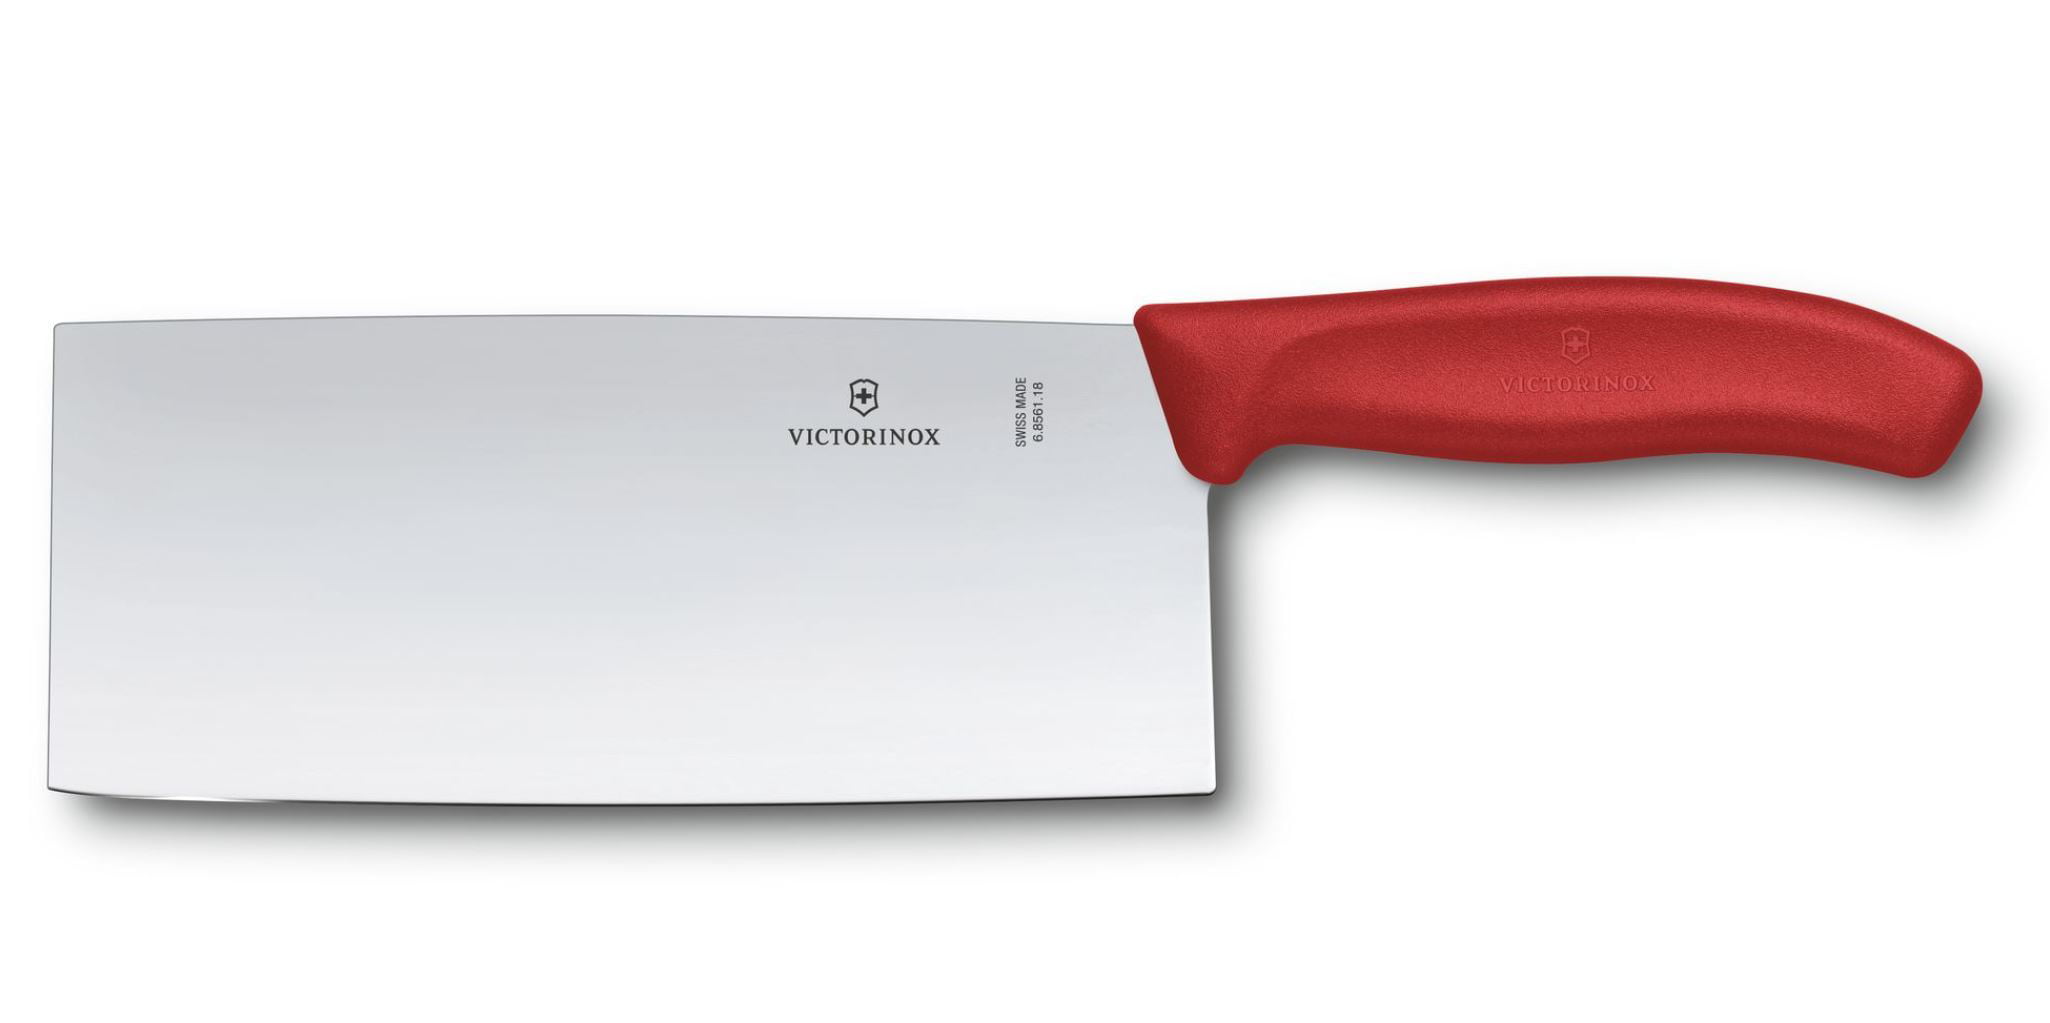 Victorinox 7 Chinese Classic Chefs Knife Stainless Steel Cleaver Butcher  Knife Fibrox Handle Swiss Made: Chefs Knives: Home & Kitchen 